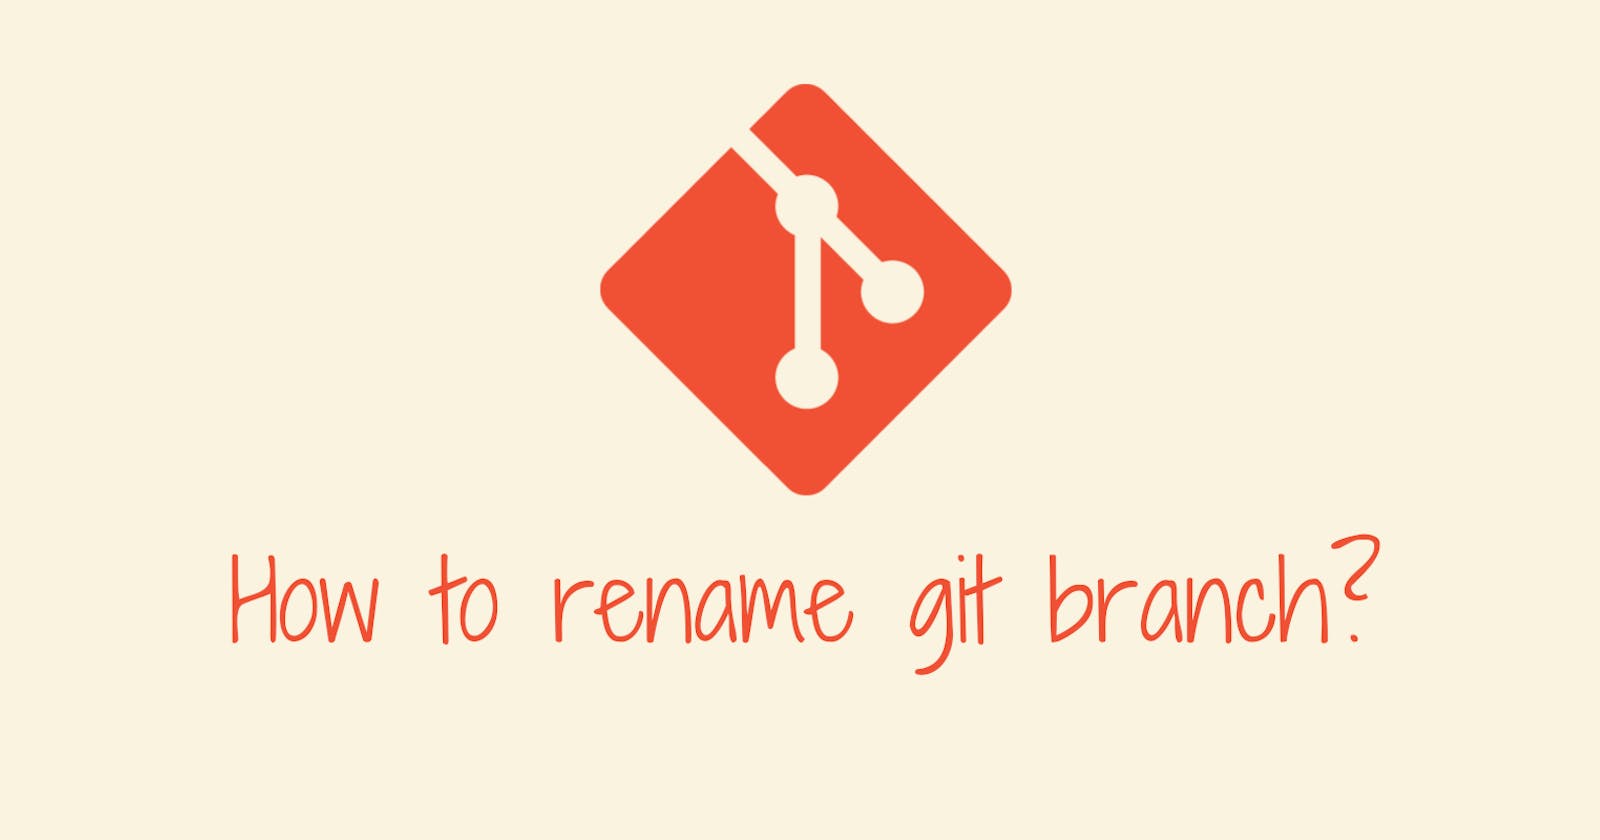 How to rename git branch?